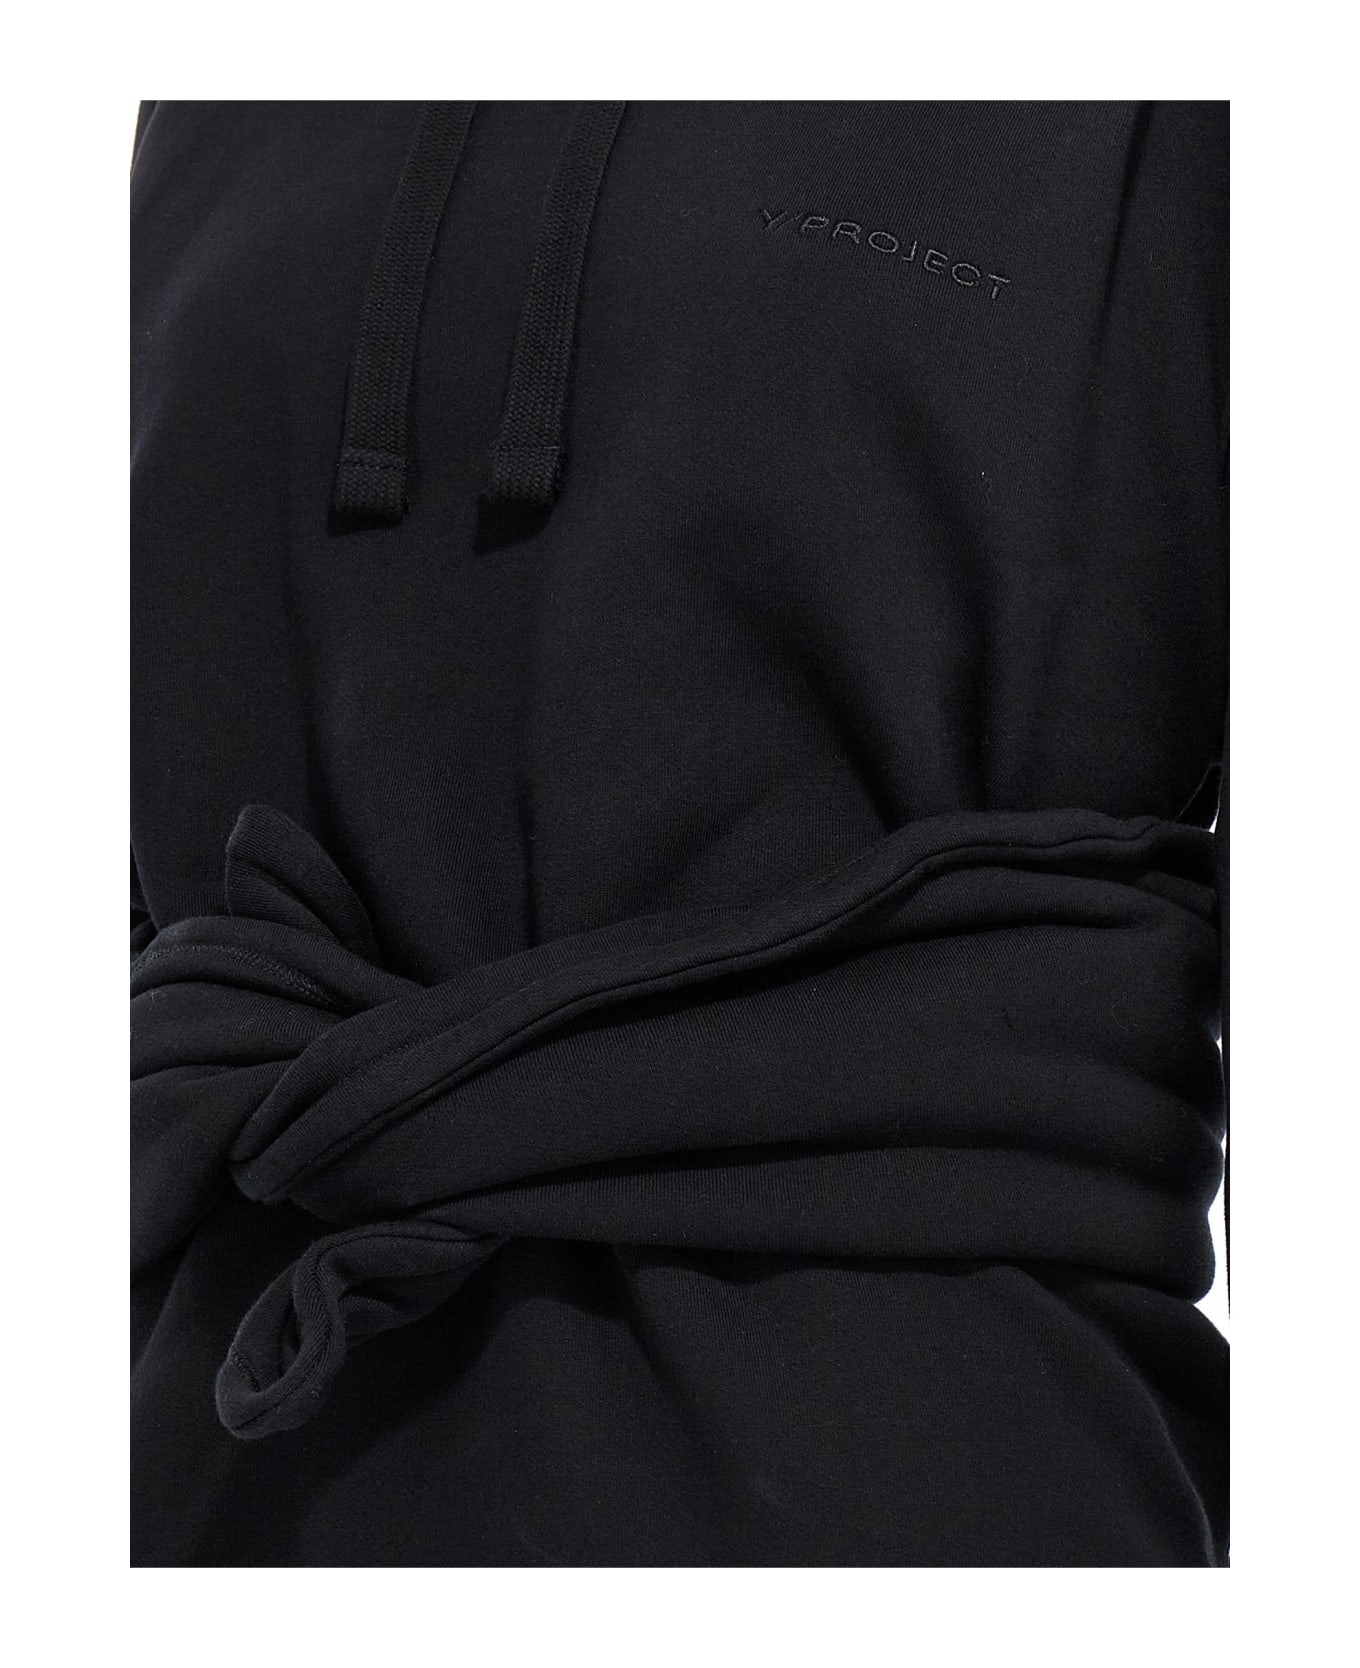 Y/Project 'wire Wrap' Hoodie - Black